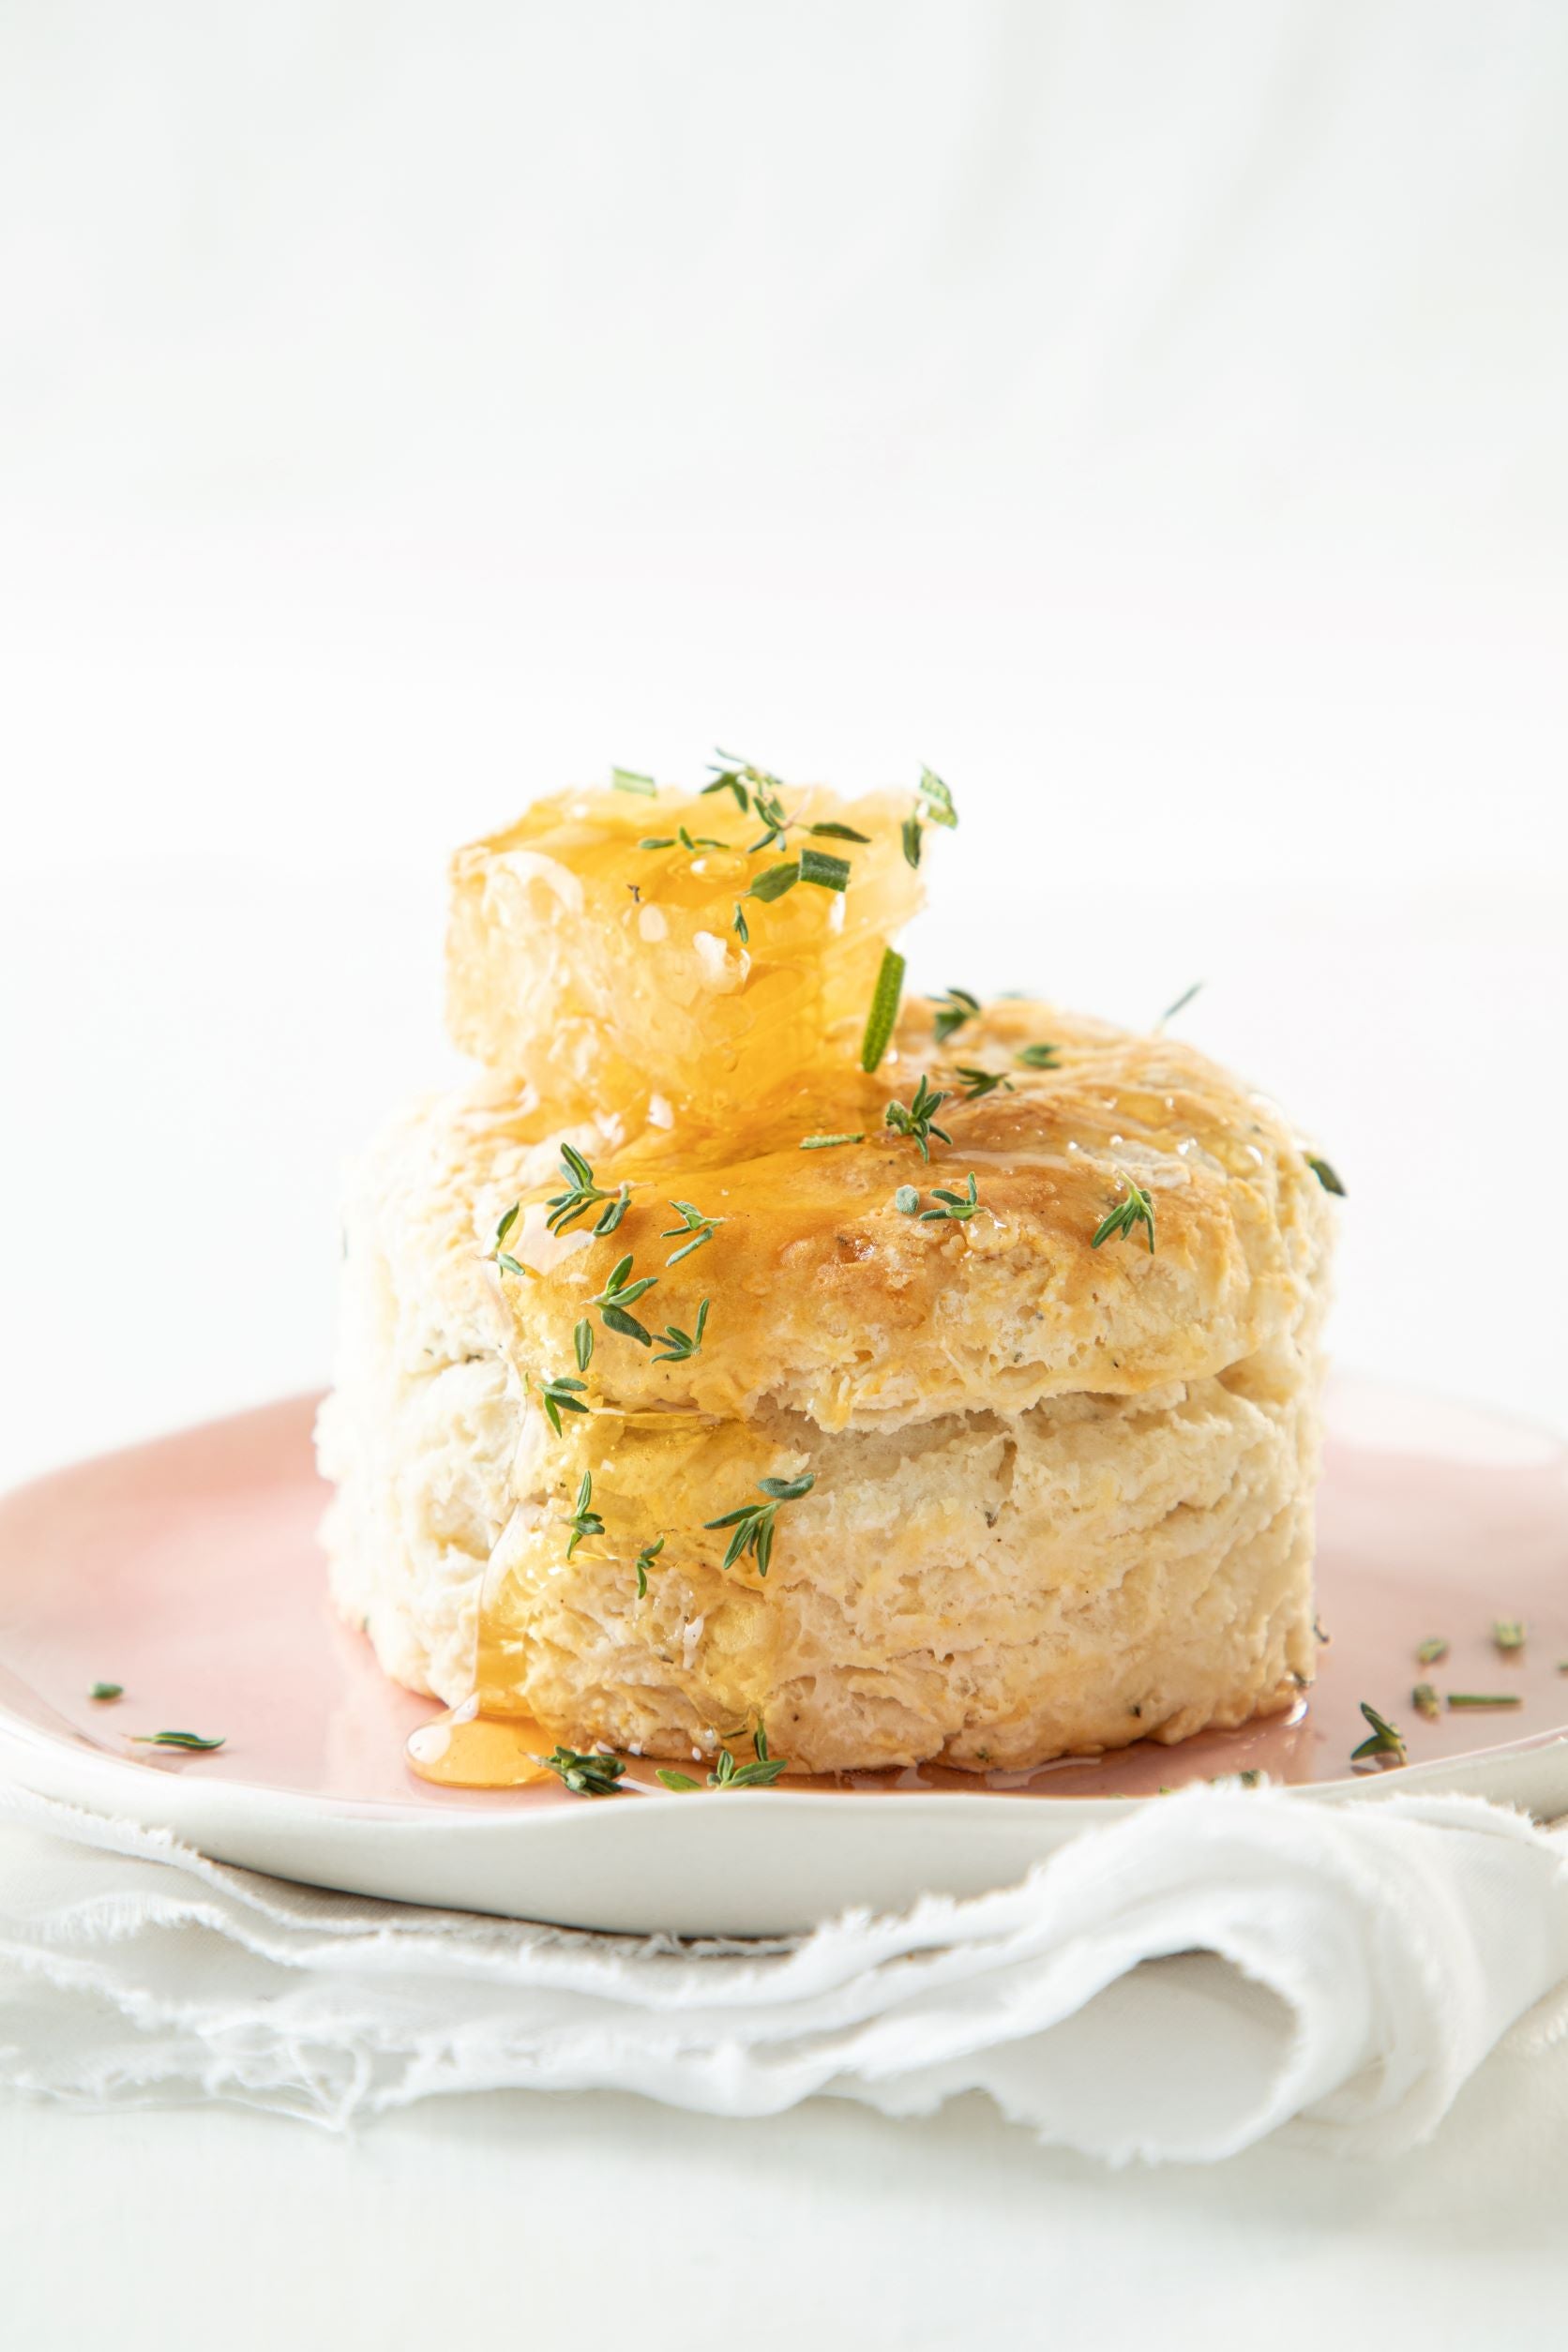 Homemade biscuit plated and toped with raw honeycomb and sprinkled with fresh rosemary. 